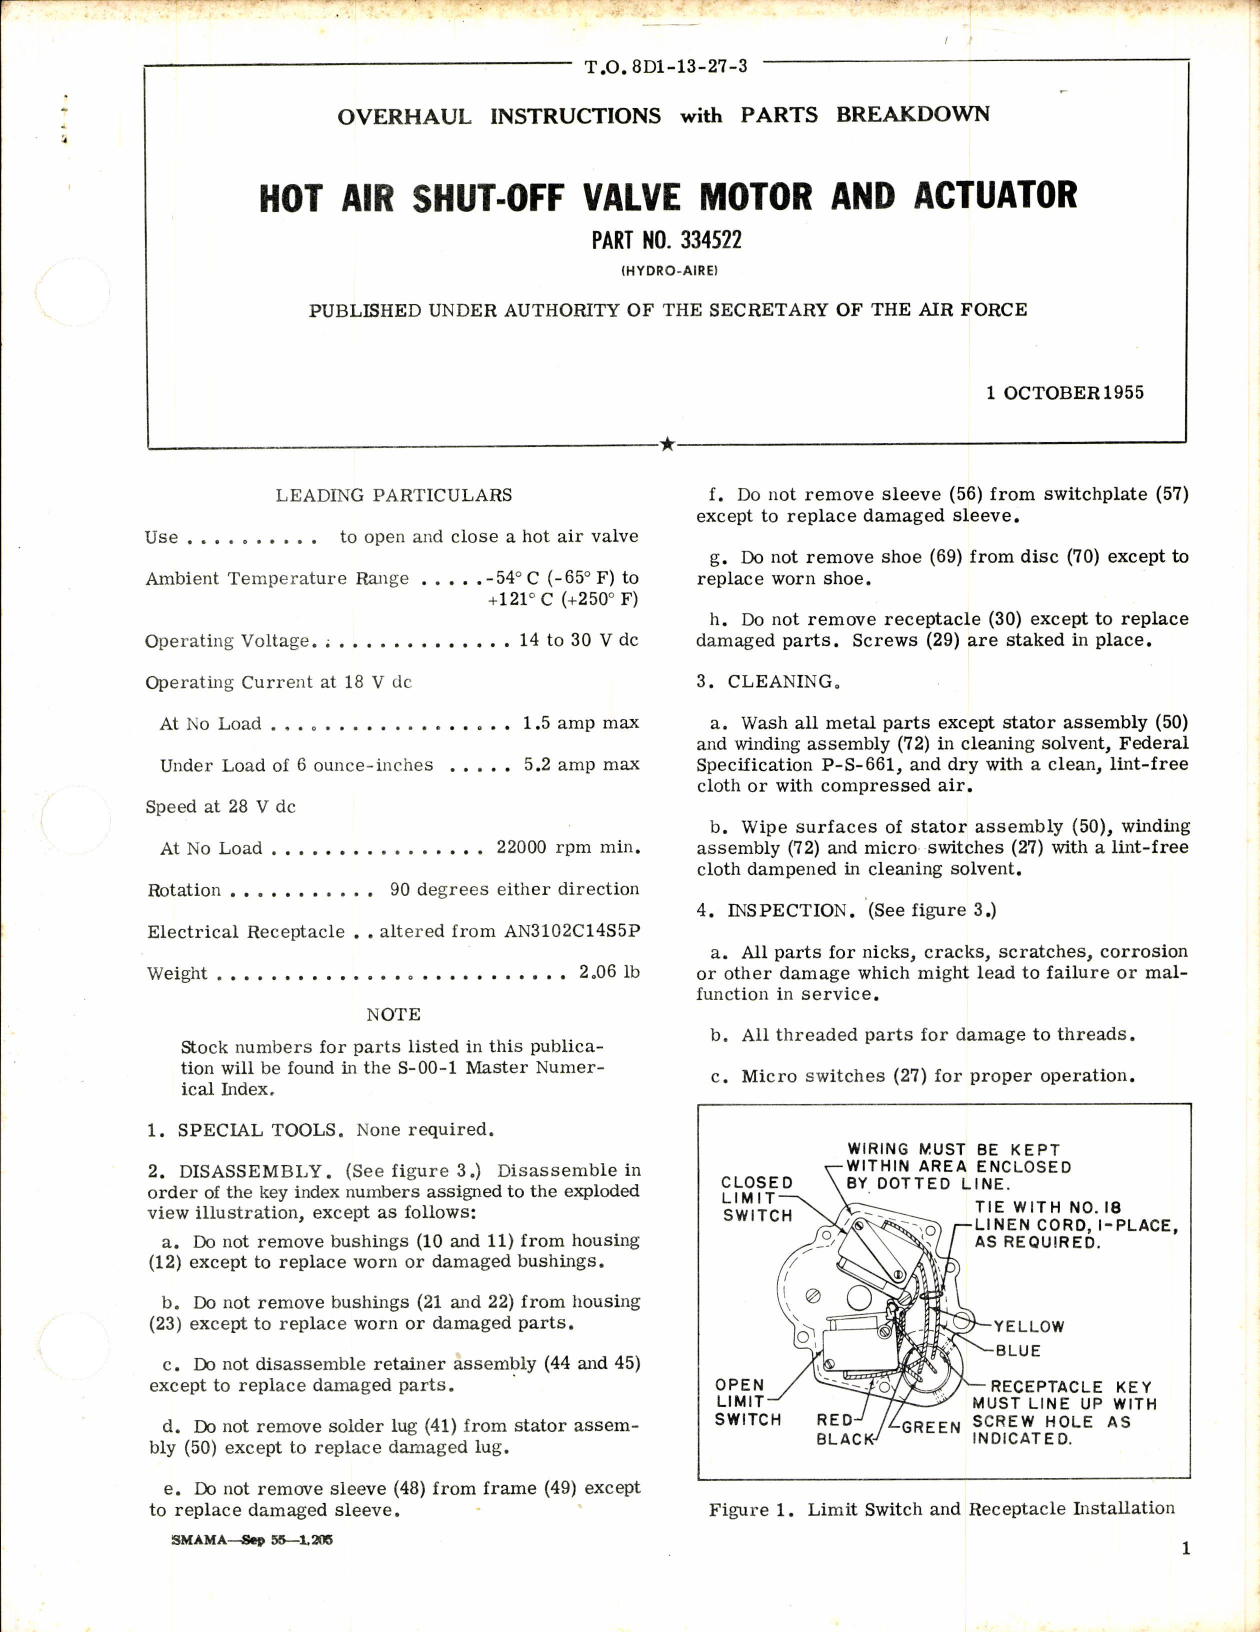 Sample page 1 from AirCorps Library document: Overhaul Instructions with Parts Breakdown for Hot Air Shut-Off Valve Motor & Actuator Part No. 334522